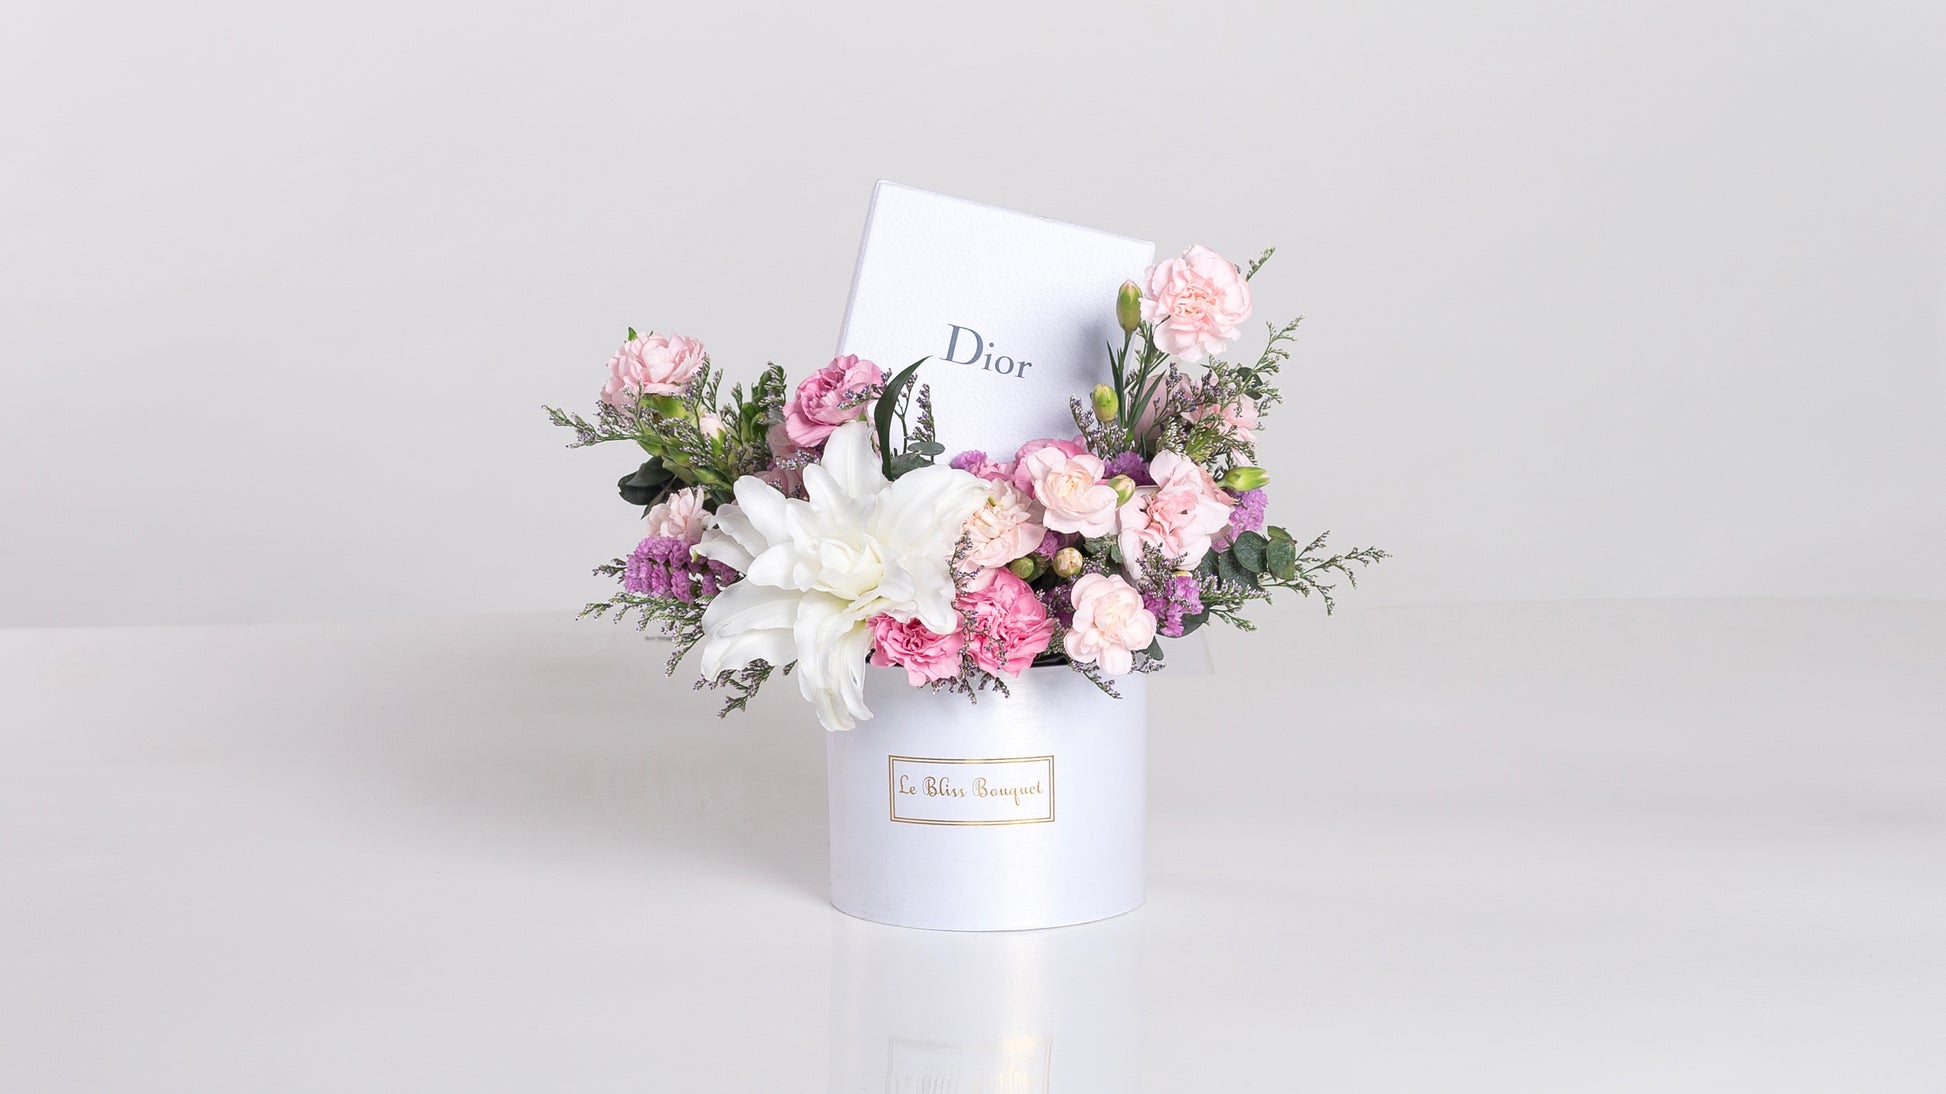 Petite Gift in a Gift Box - Le Bliss Bouquet